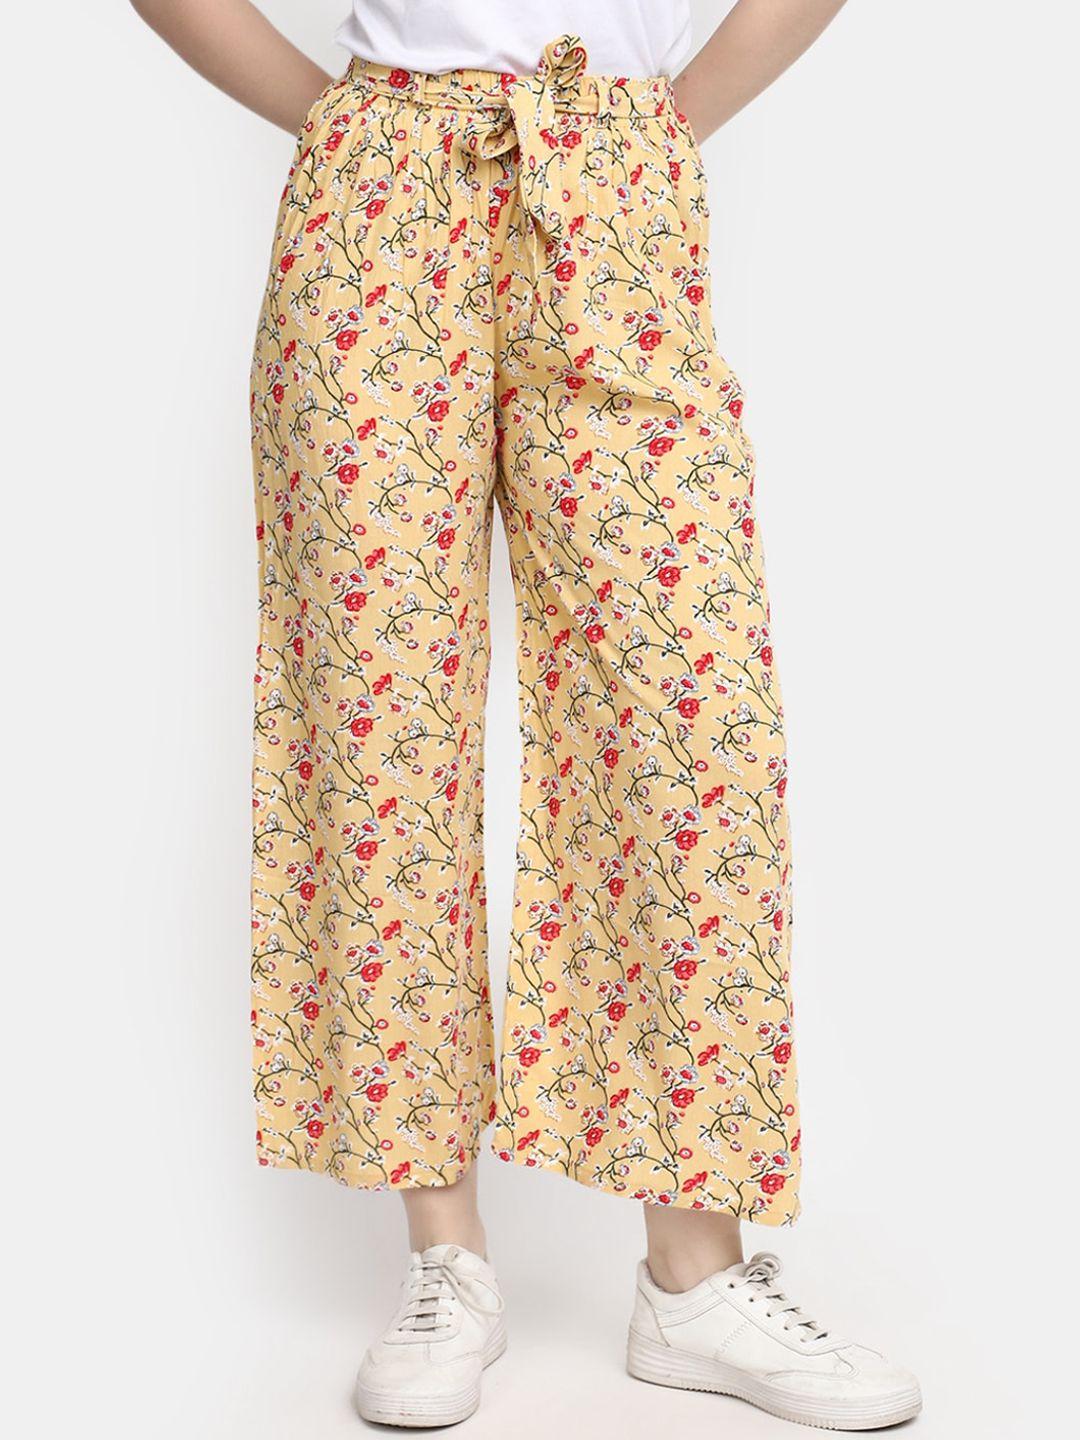 v-mart women mid-rise floral printed cotton parallel trousers